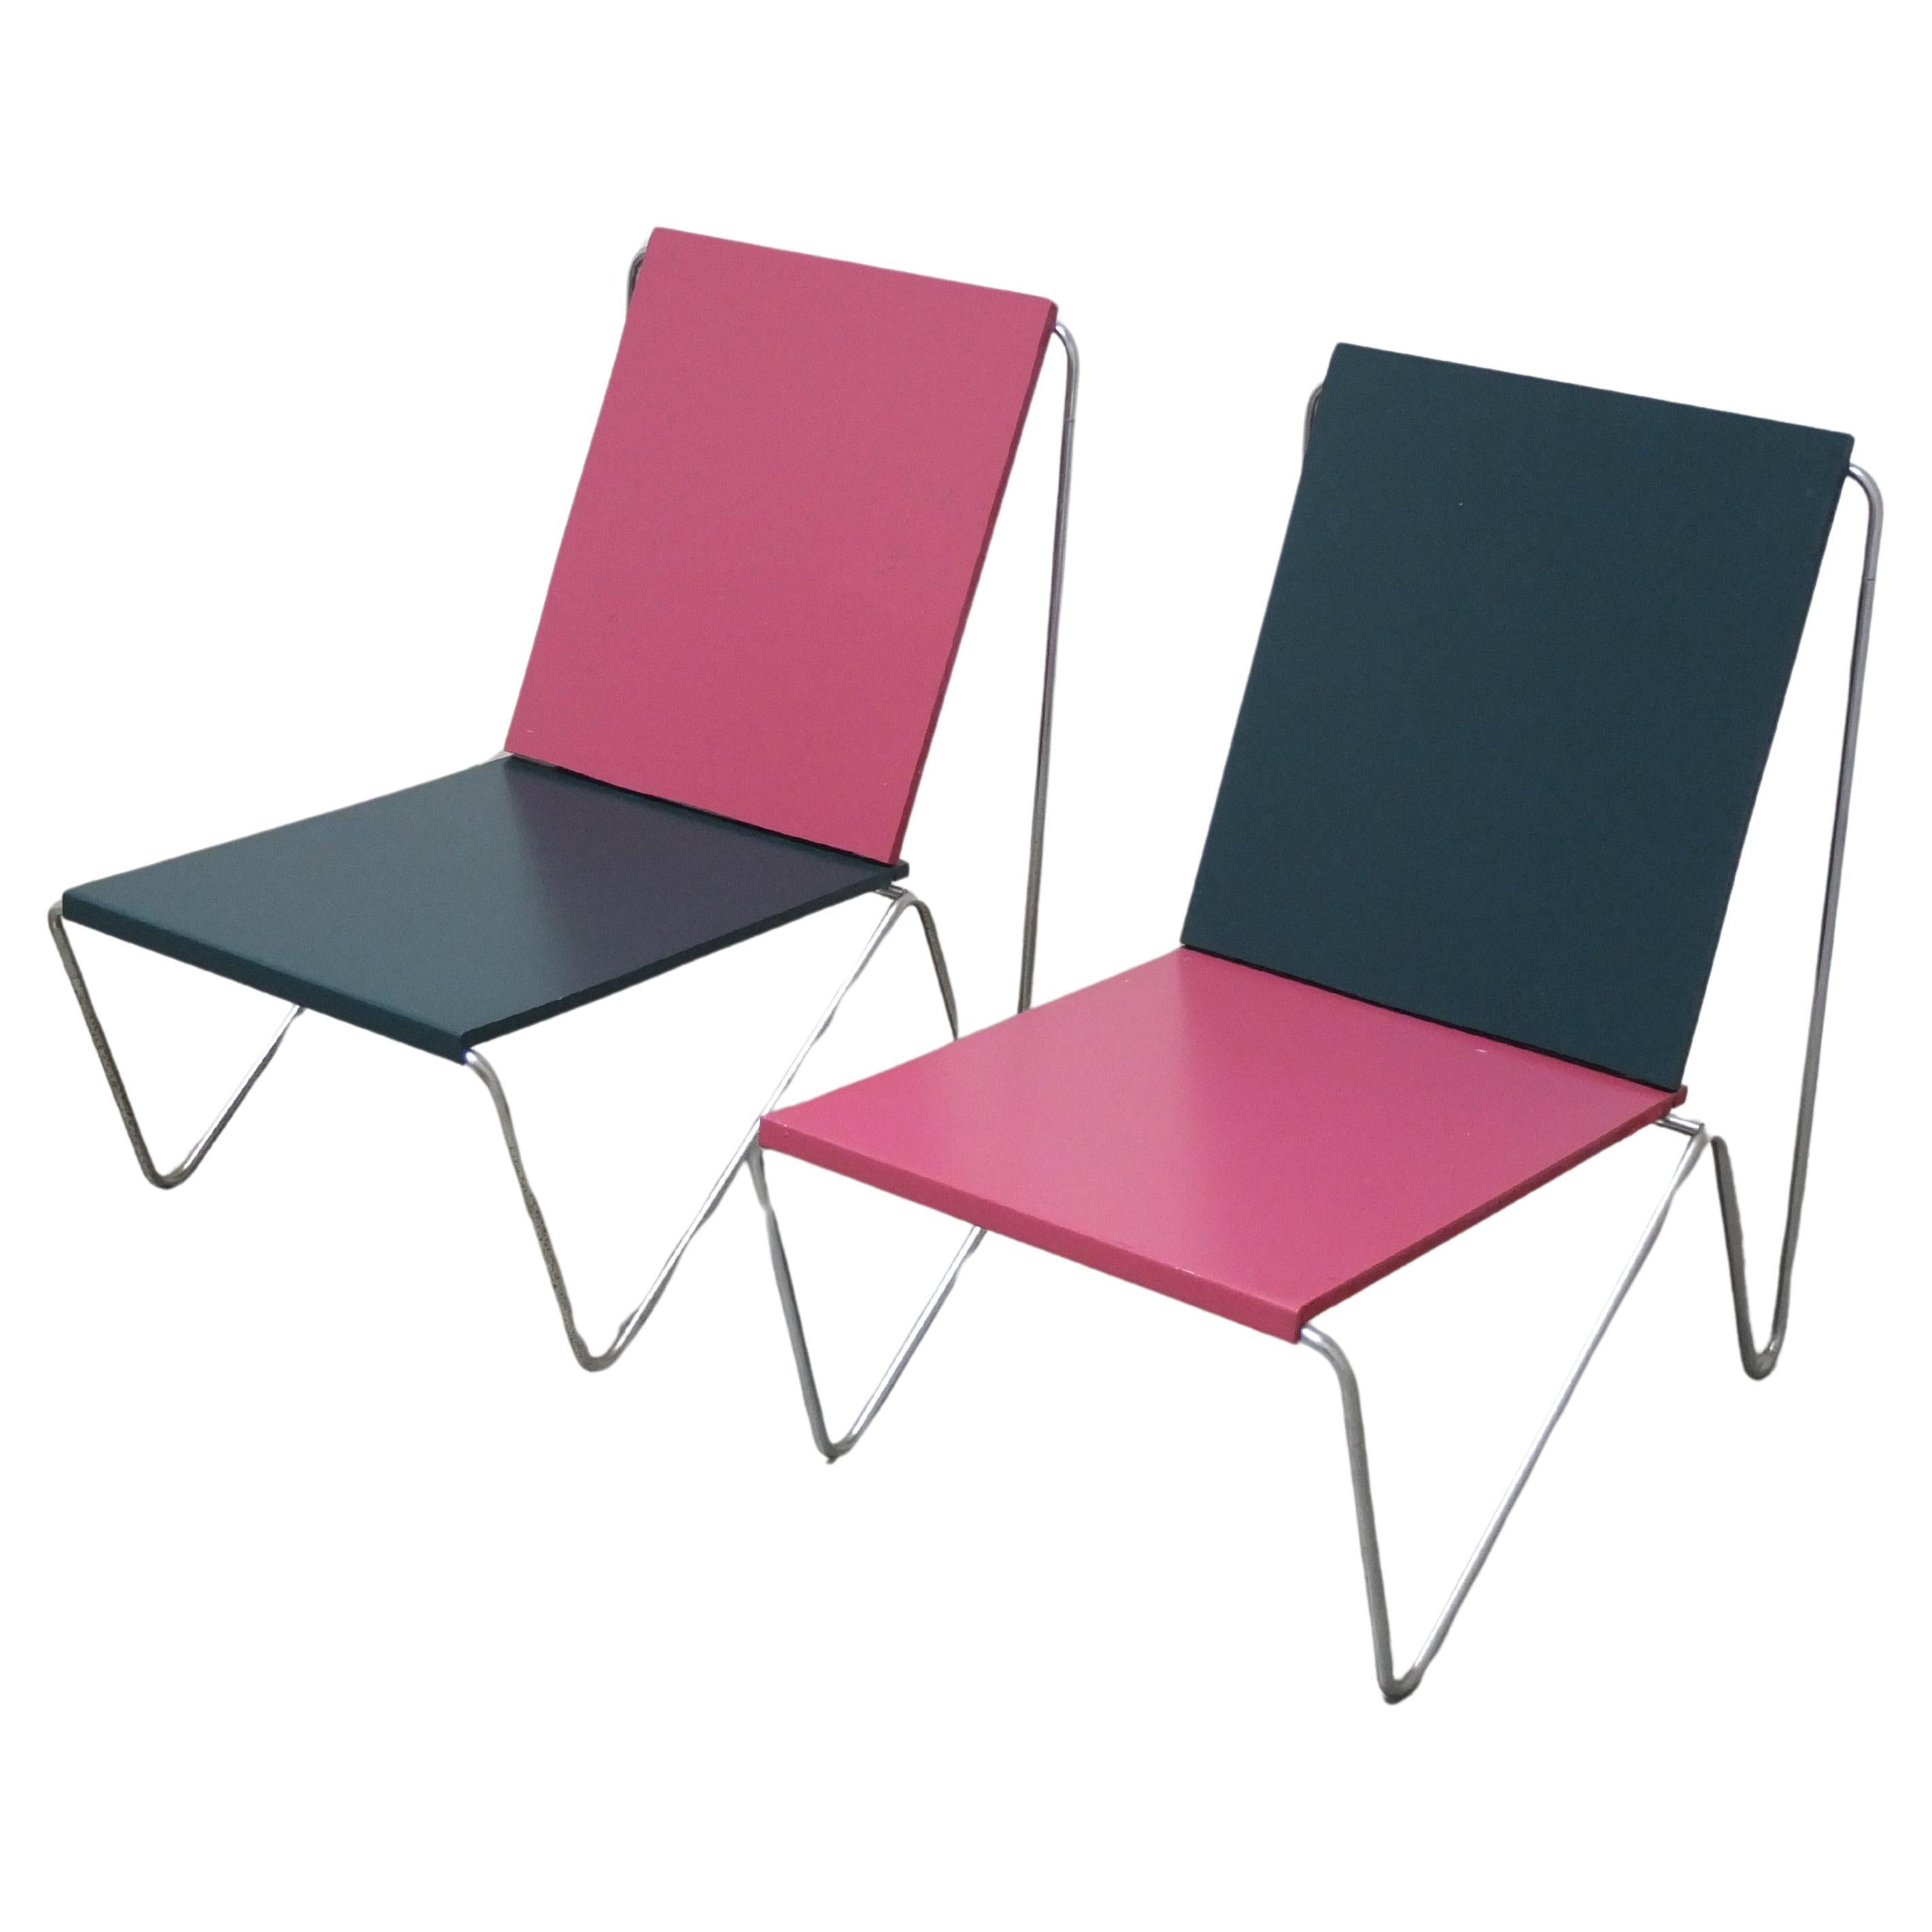 Unique Pair of 'Bachelor' Chairs by Verner Panton for Fritz Hansen, 1971 For Sale